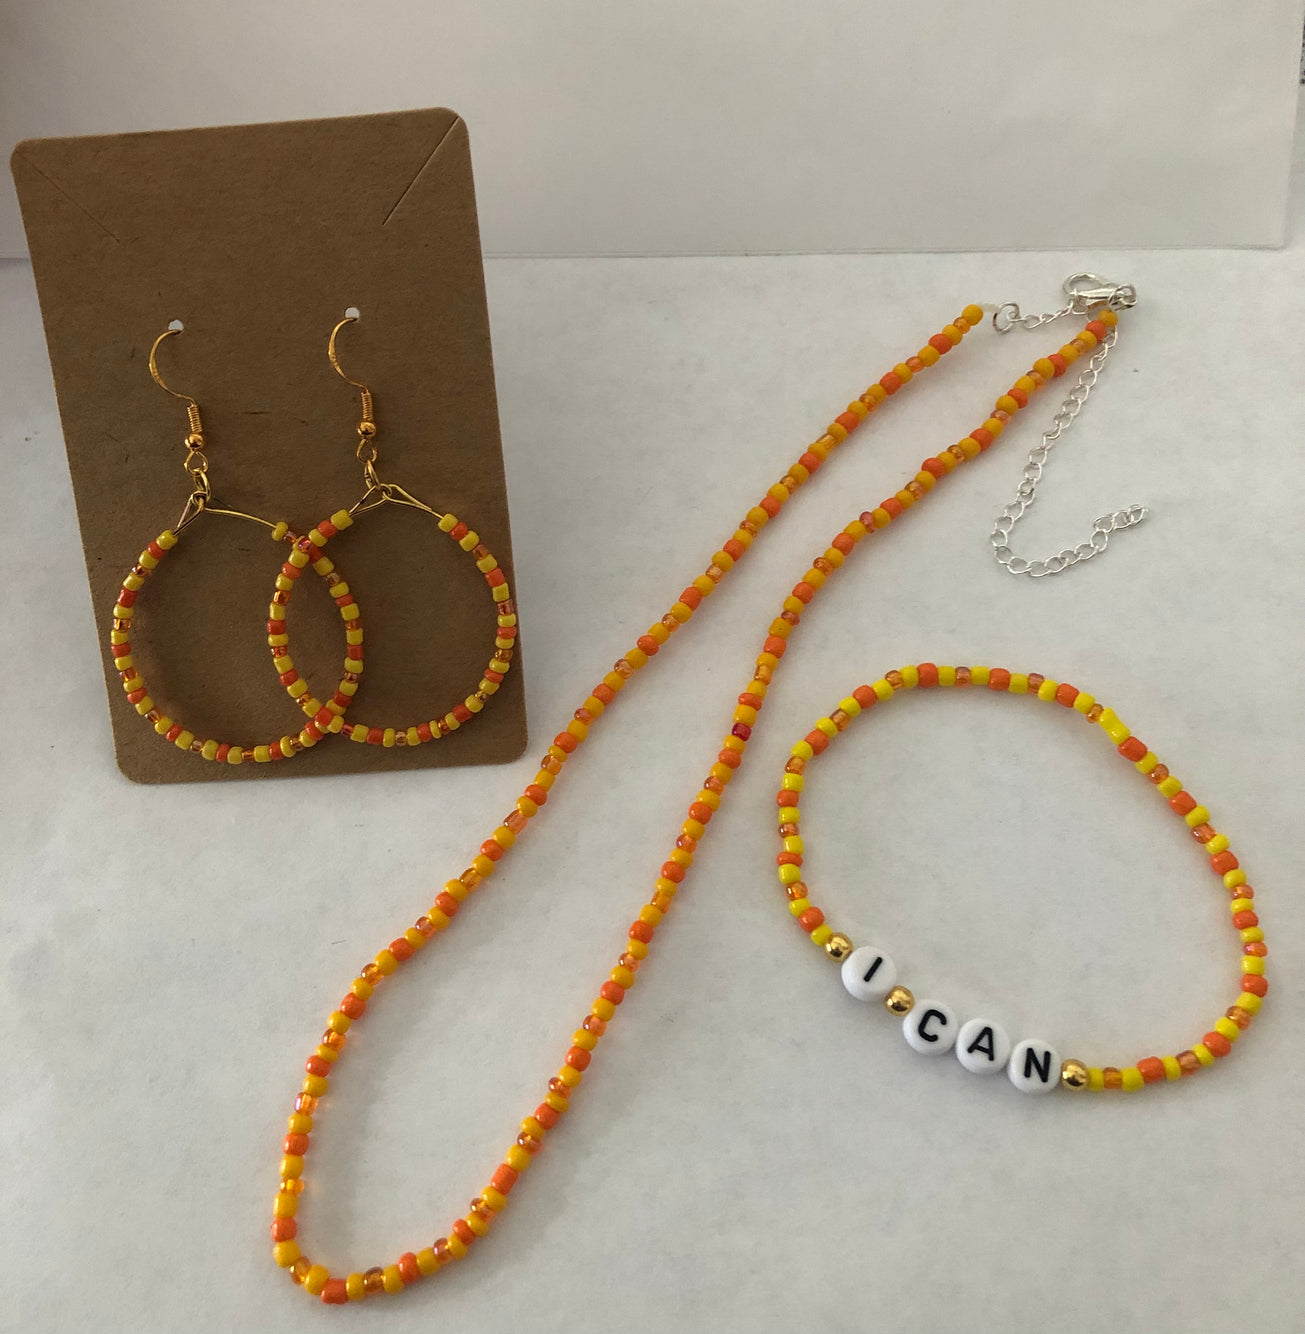 I can empowering jewelry set